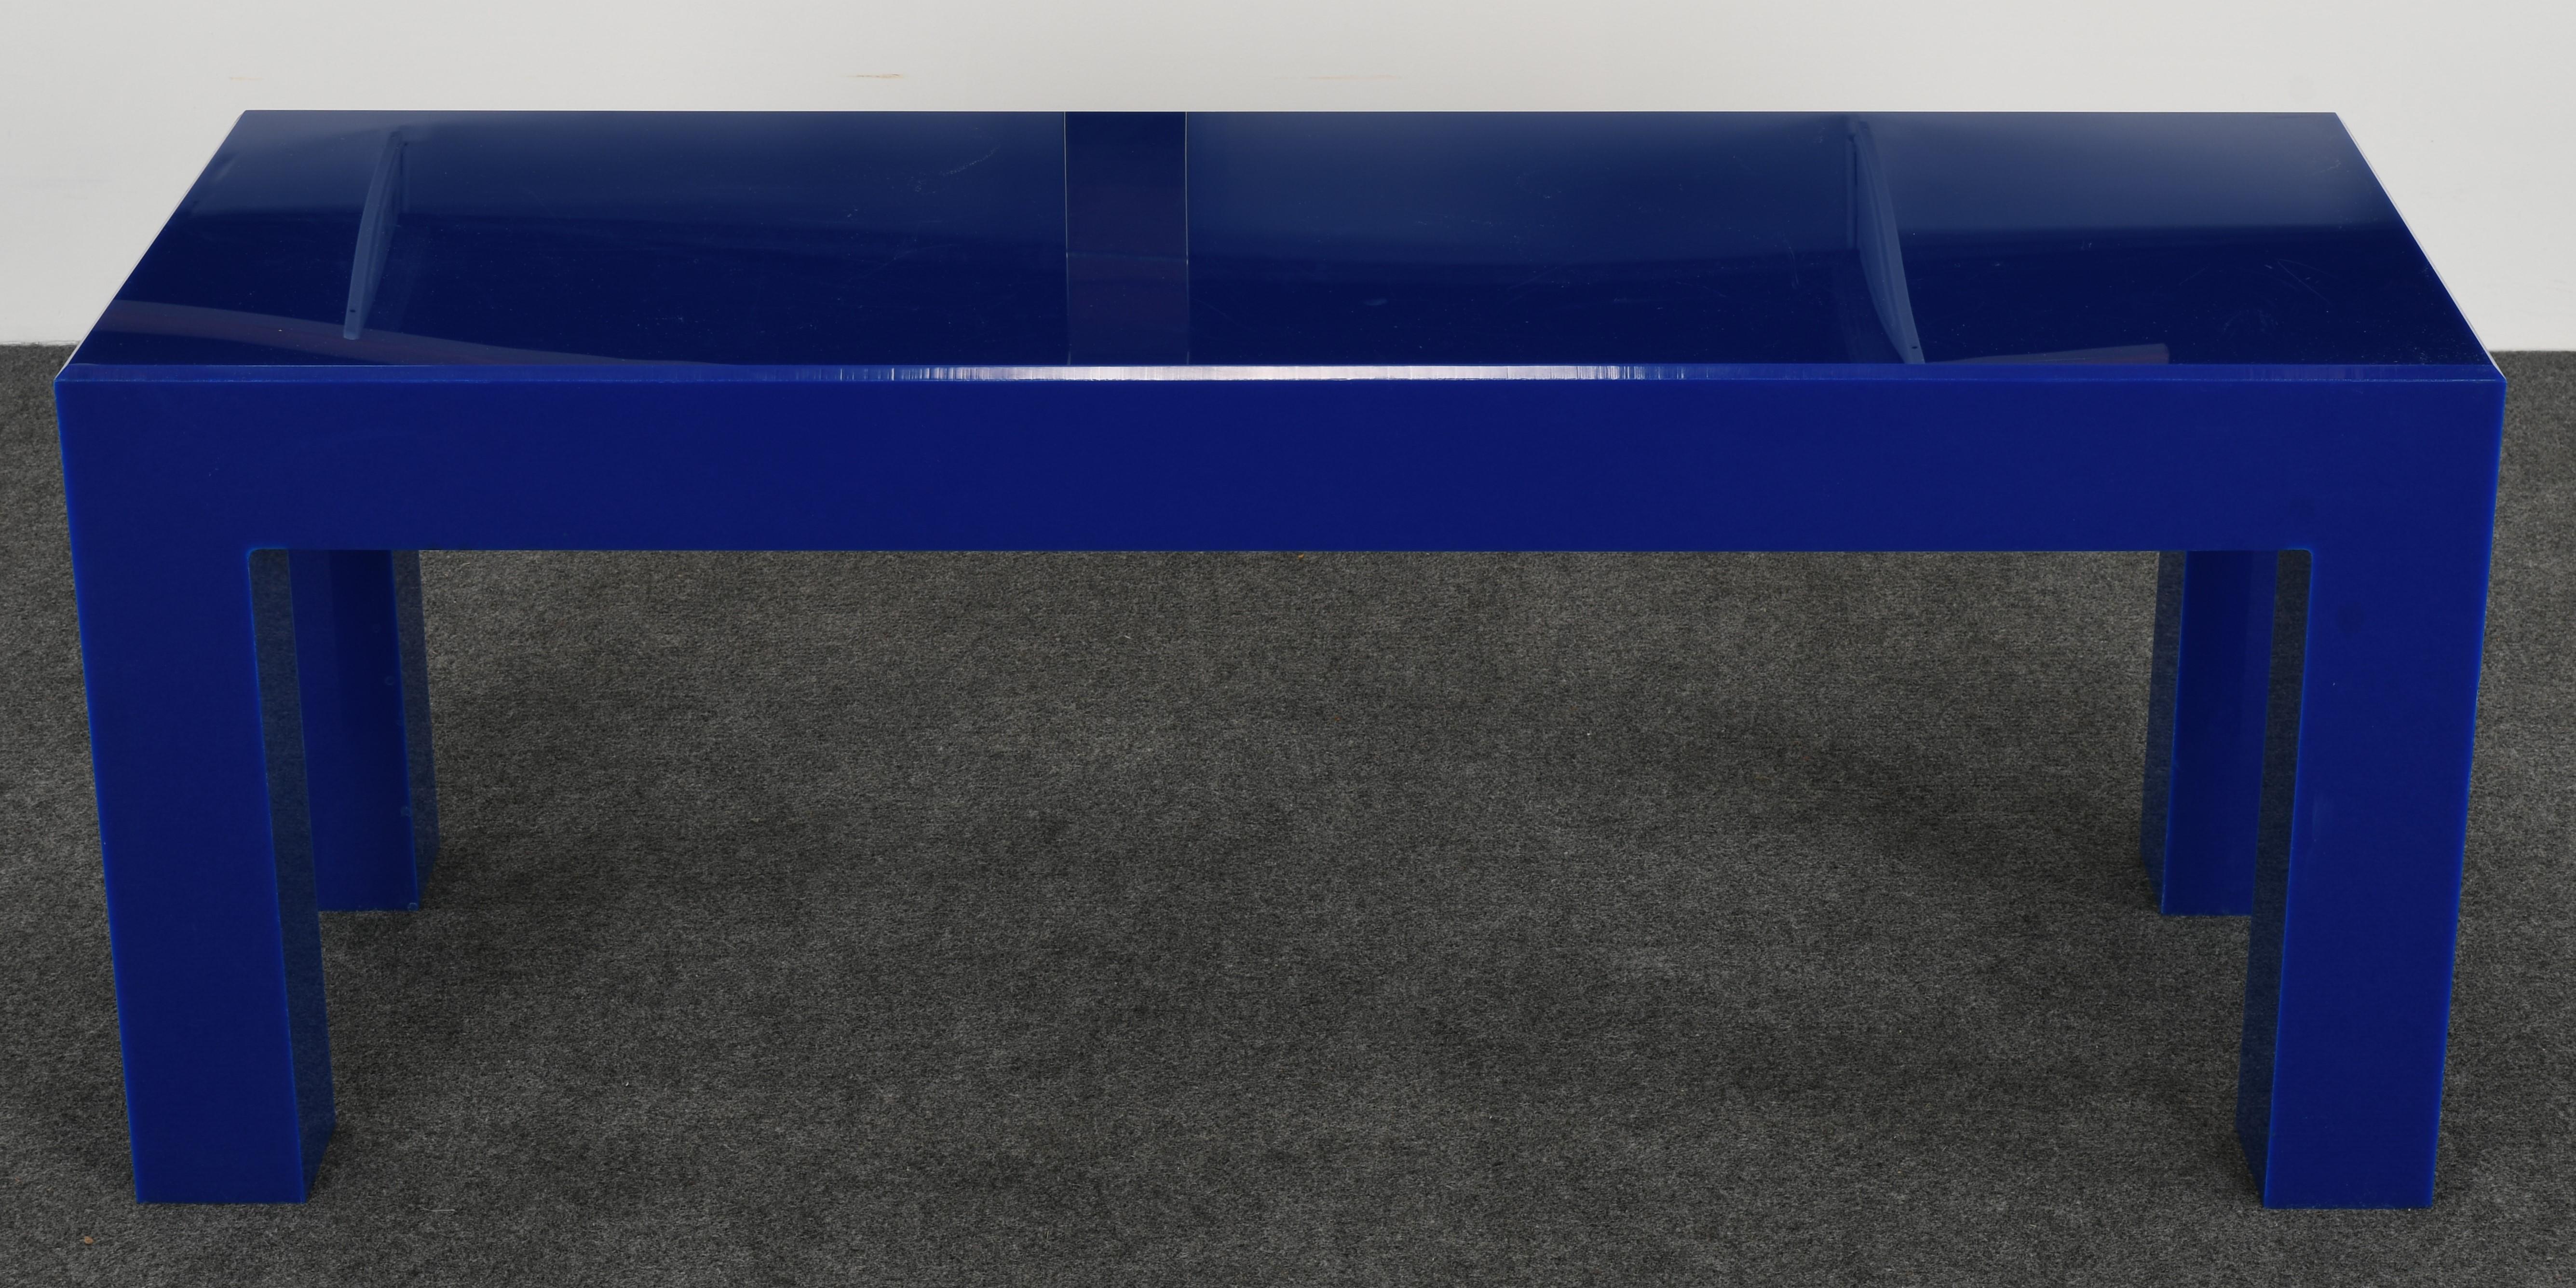 A Yves Klein blue acrylic or Lucite coffee table. This cocktail table would make a stunning focal point for a room. The table is structurally sound with age-appropriate wear. There are fine scratches and a few scuffs throughout, as shown in